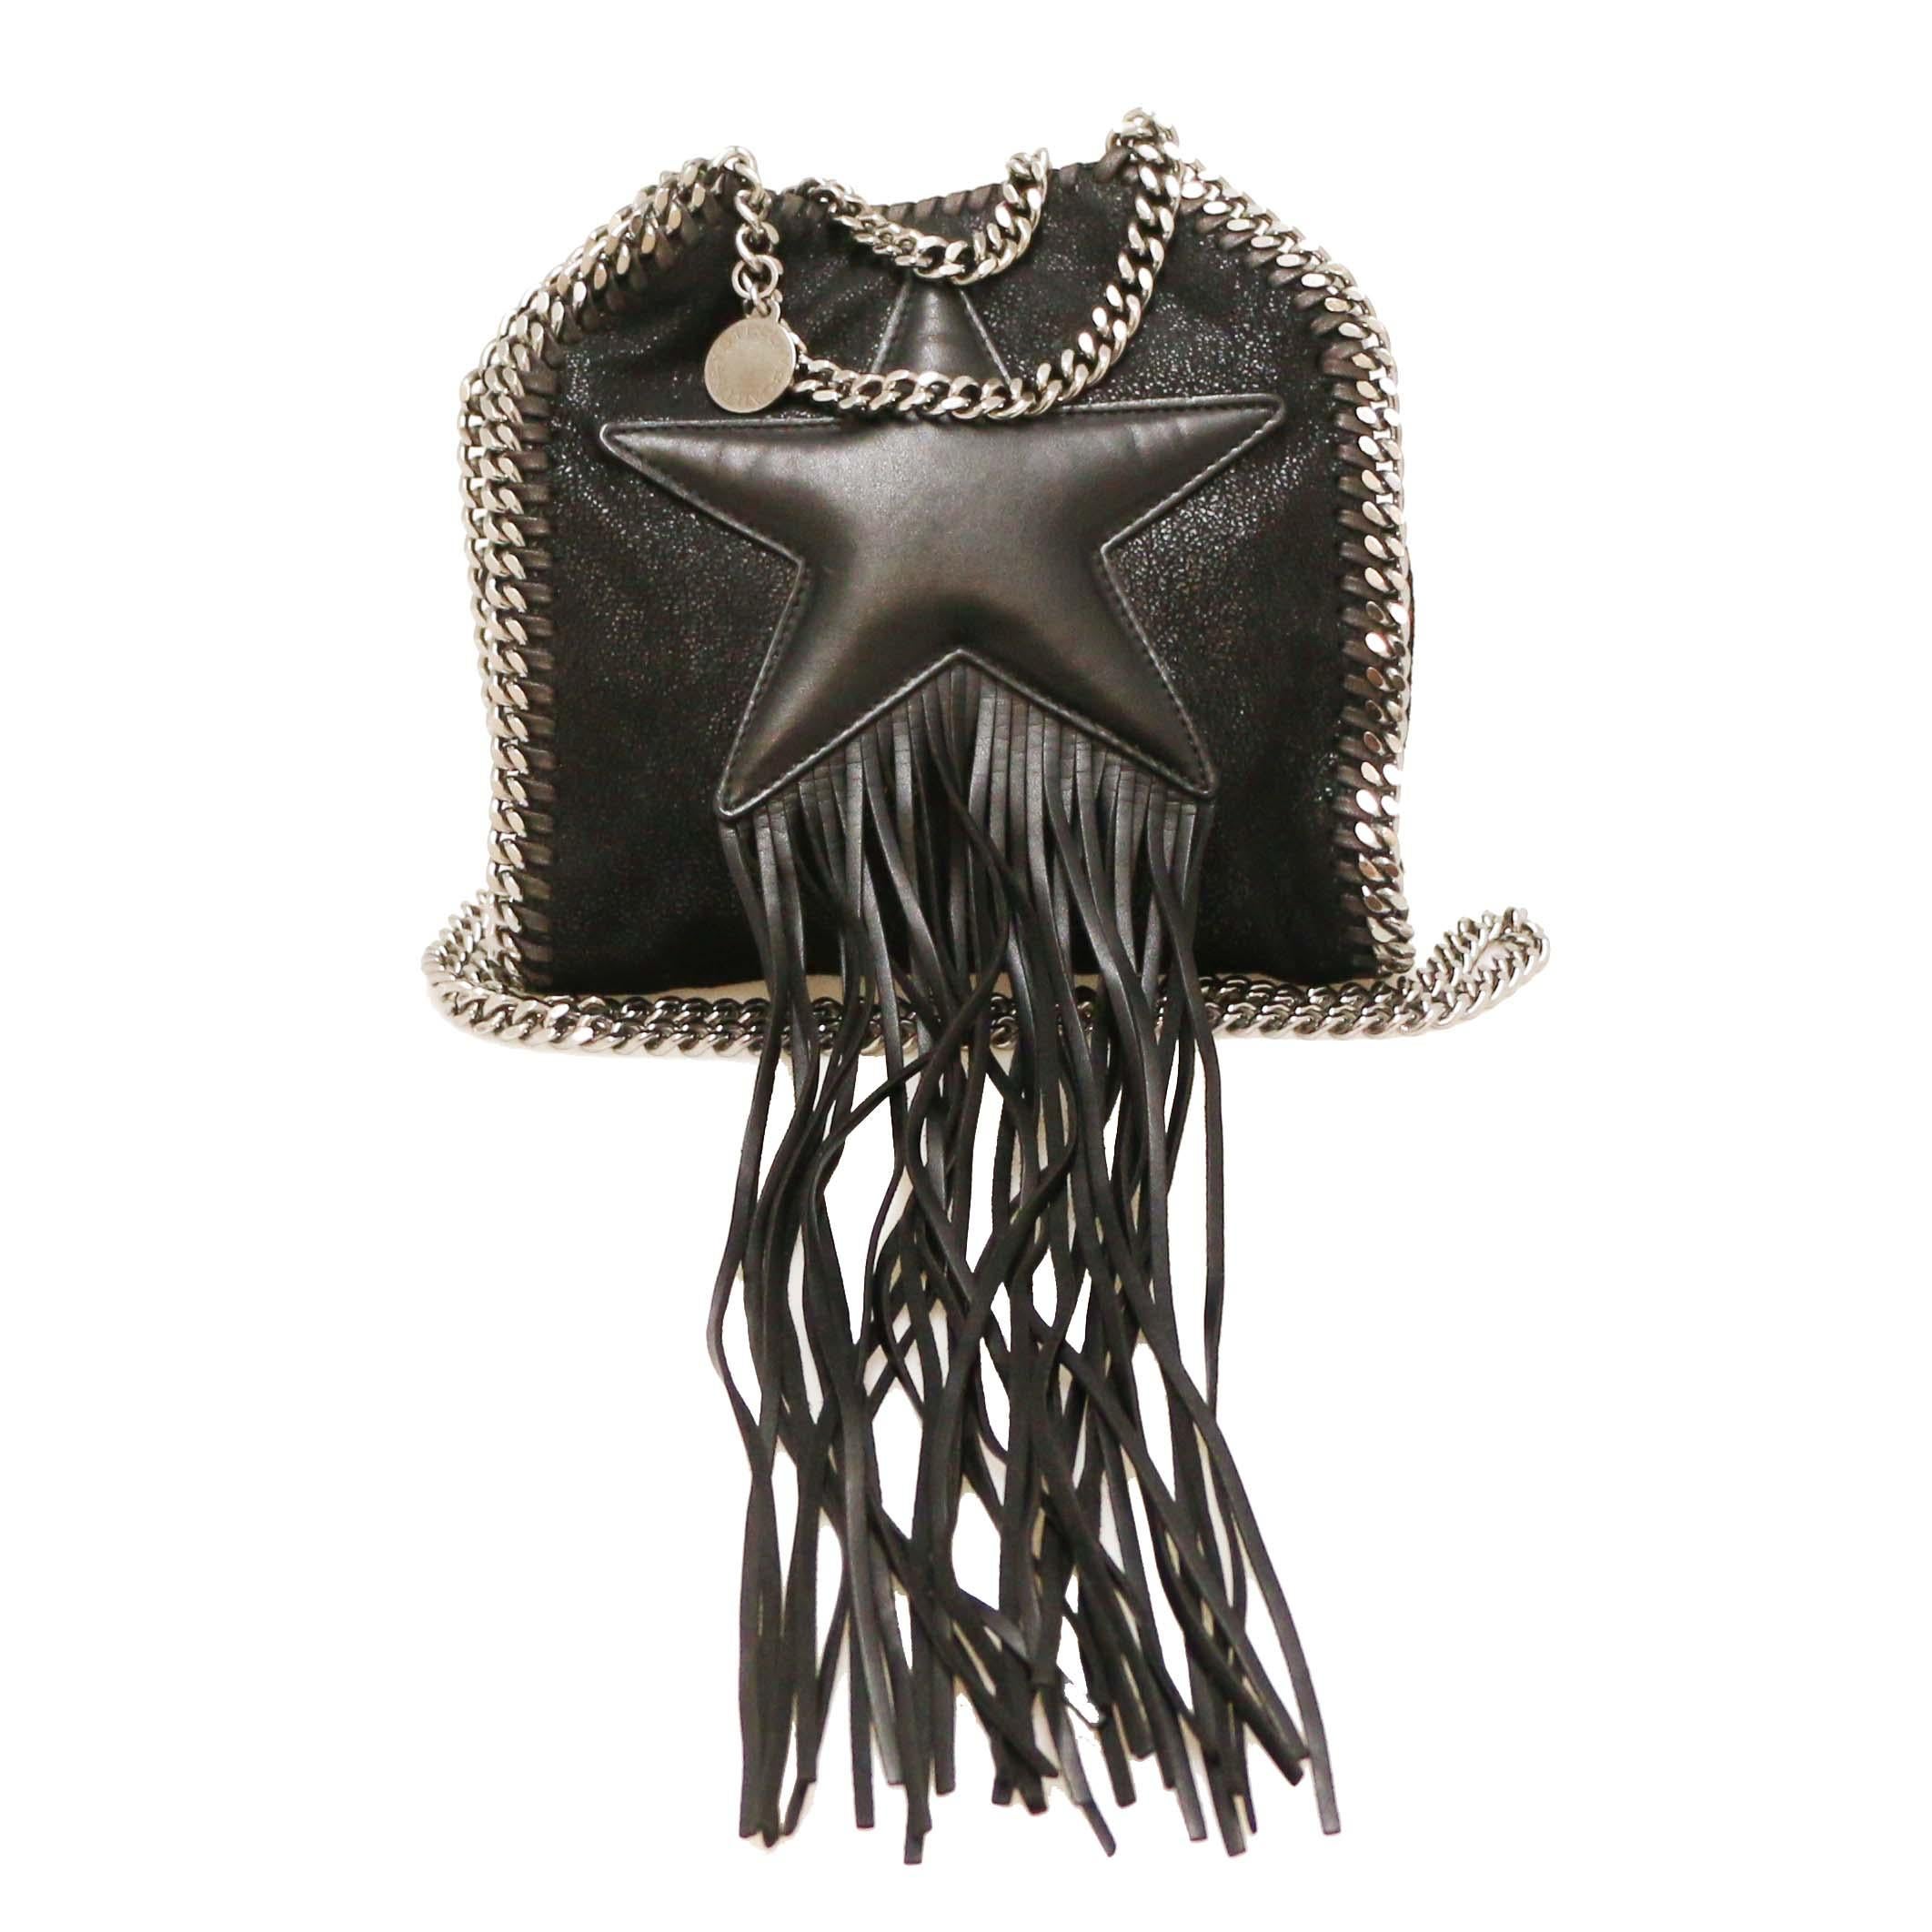 Very good condition 
Made in Italy
Material: suede leather, smooth
Colour: black
Dimensions: 18 x 19 x 6 cm
Handles: hand-held
Shoulder strap: total length 106 cm
Jewellery: silver metal
Magnetic pressure
Leather fringes
Lining: pink monogram